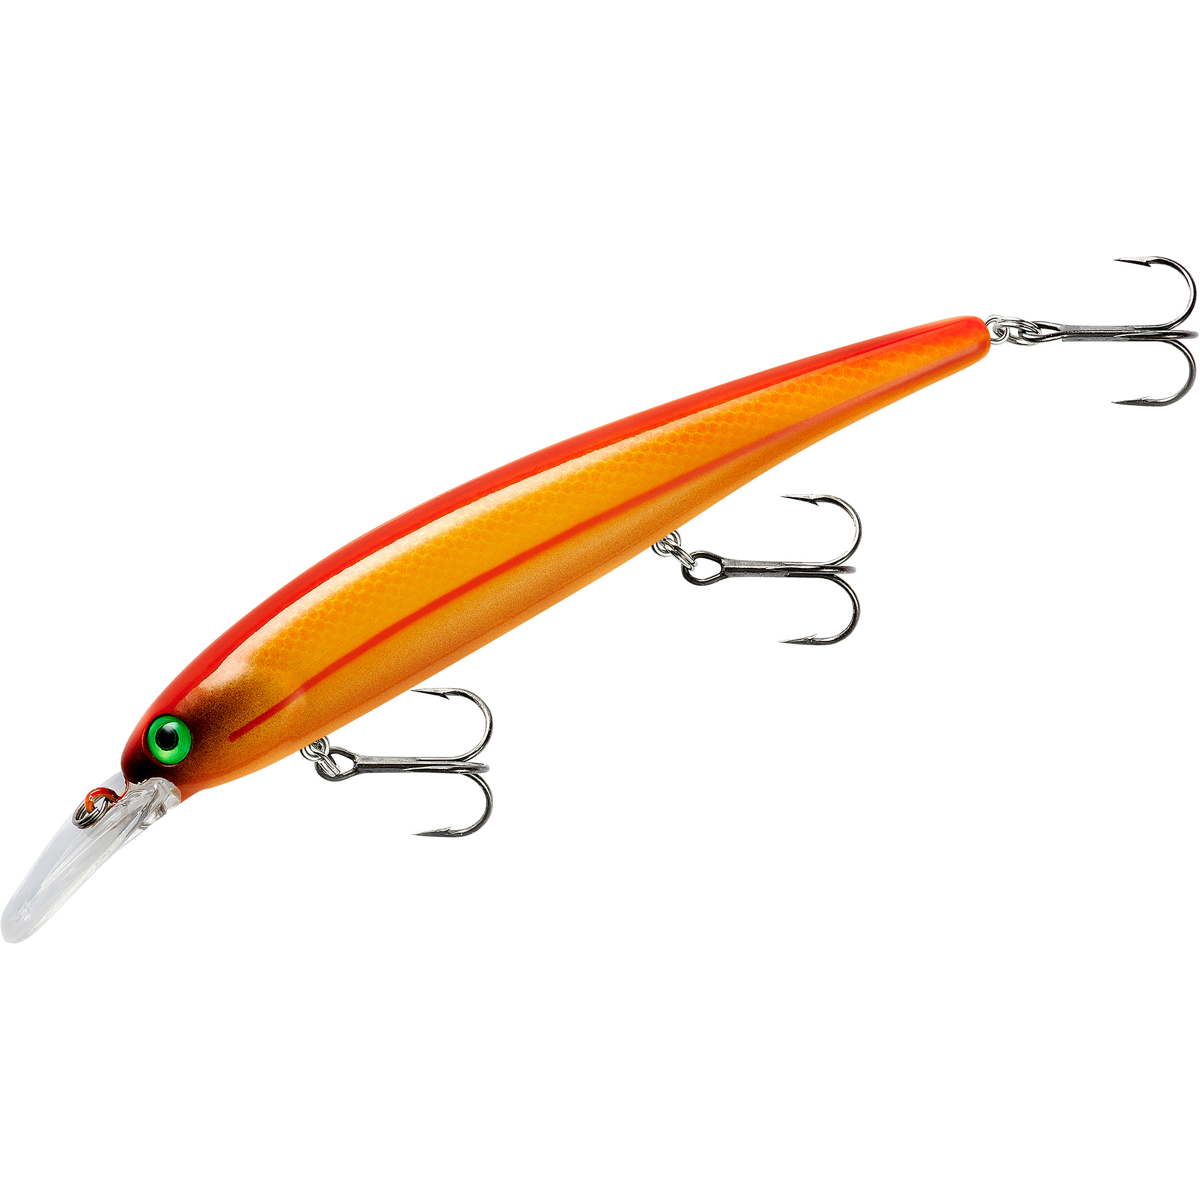 Photo of Bandit Lures Shallow Walleye Lure for sale at United Tackle Shops.